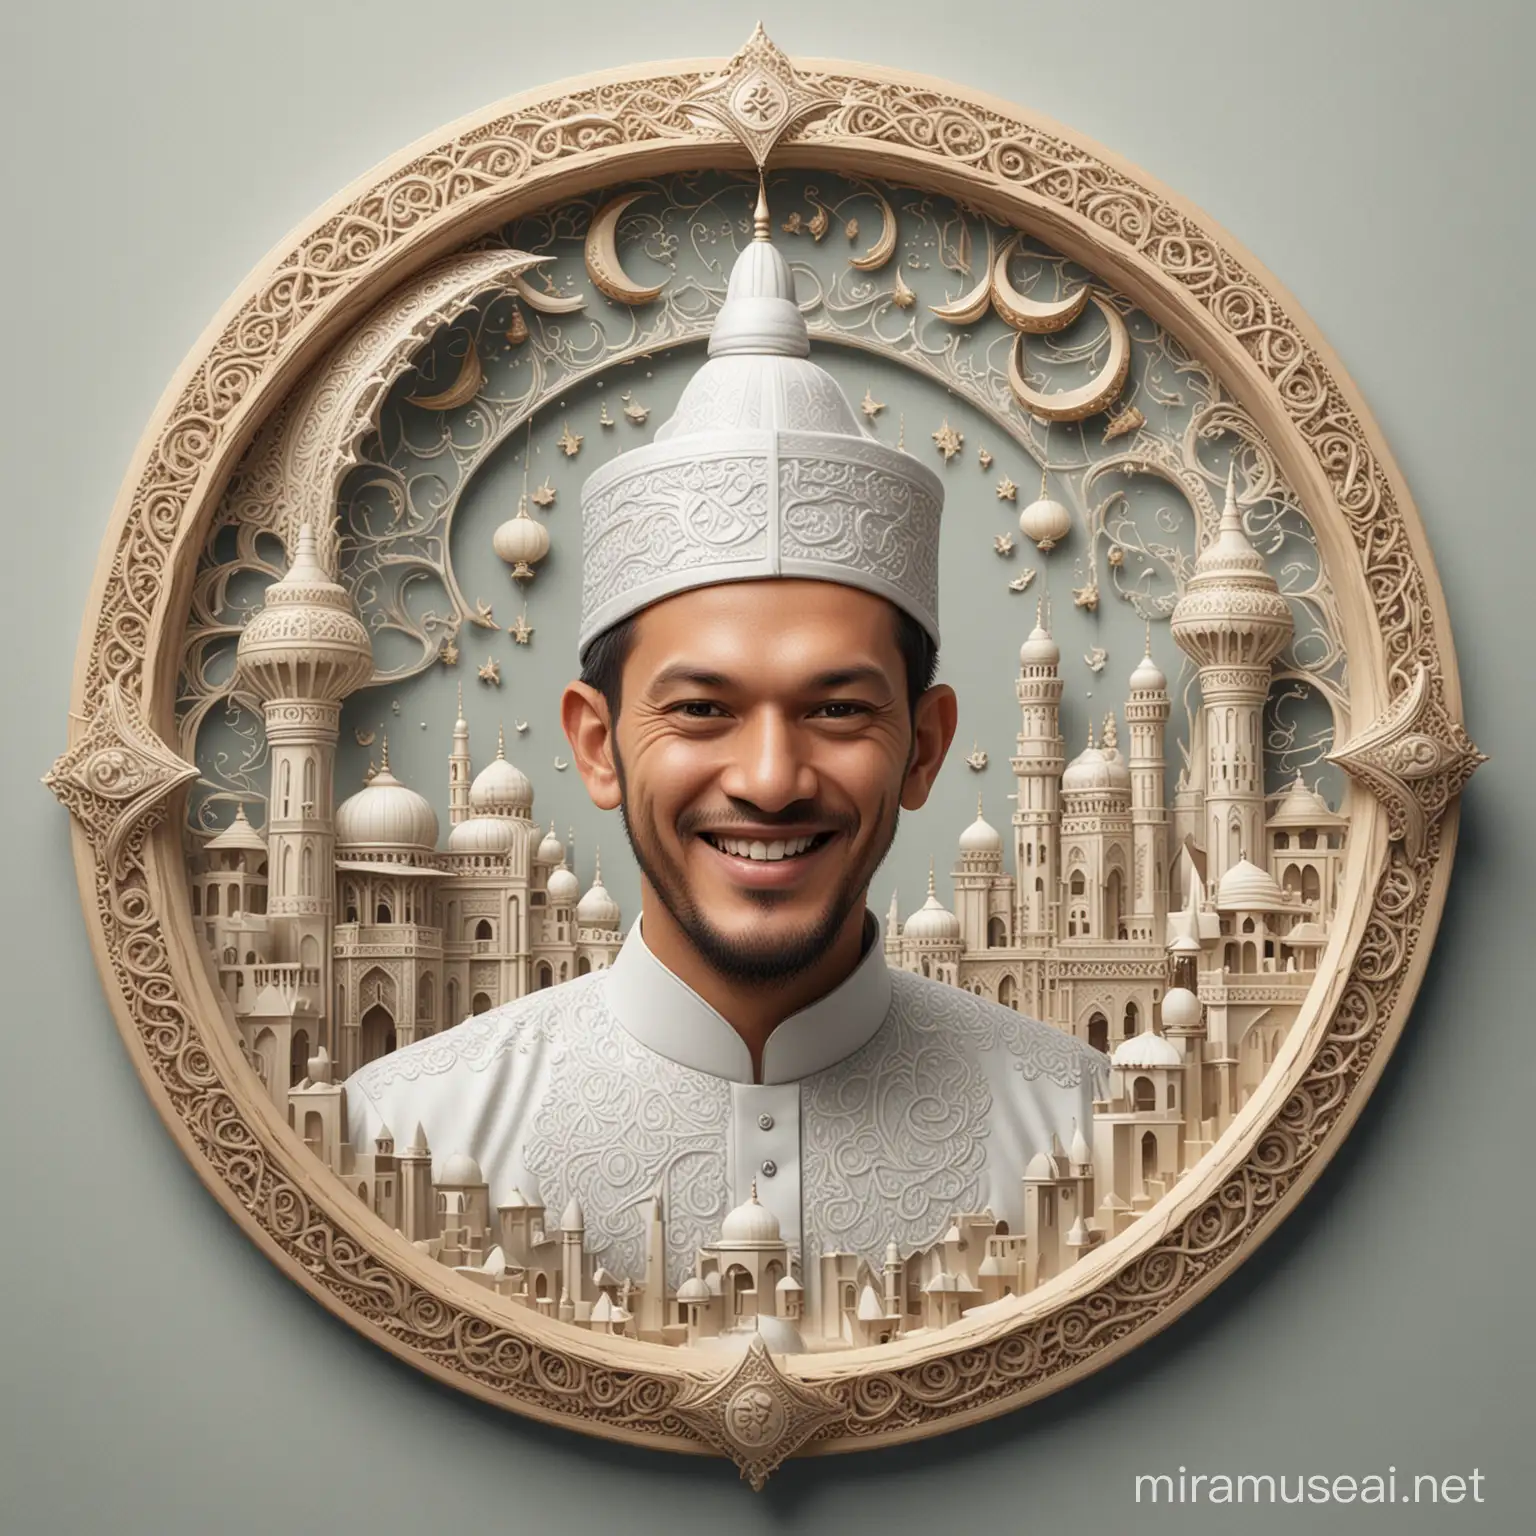 The logo design is very real 4D, a circle with an Islamic architectural frame, in the middle there is a mosque, below there are several ketupat. all of that, in front there is a close up of an Indonesian man in traditional Islamic clothing, smiling looking ahead, luxurious casual Muslim clothes, with namaste hands (photo is very real and detailed). ribbon with Indonesian text "SELAMAT IDUL FITRI". The shining silver background is decorated with crescent moons and lantern motifs, very detailed and complicated.